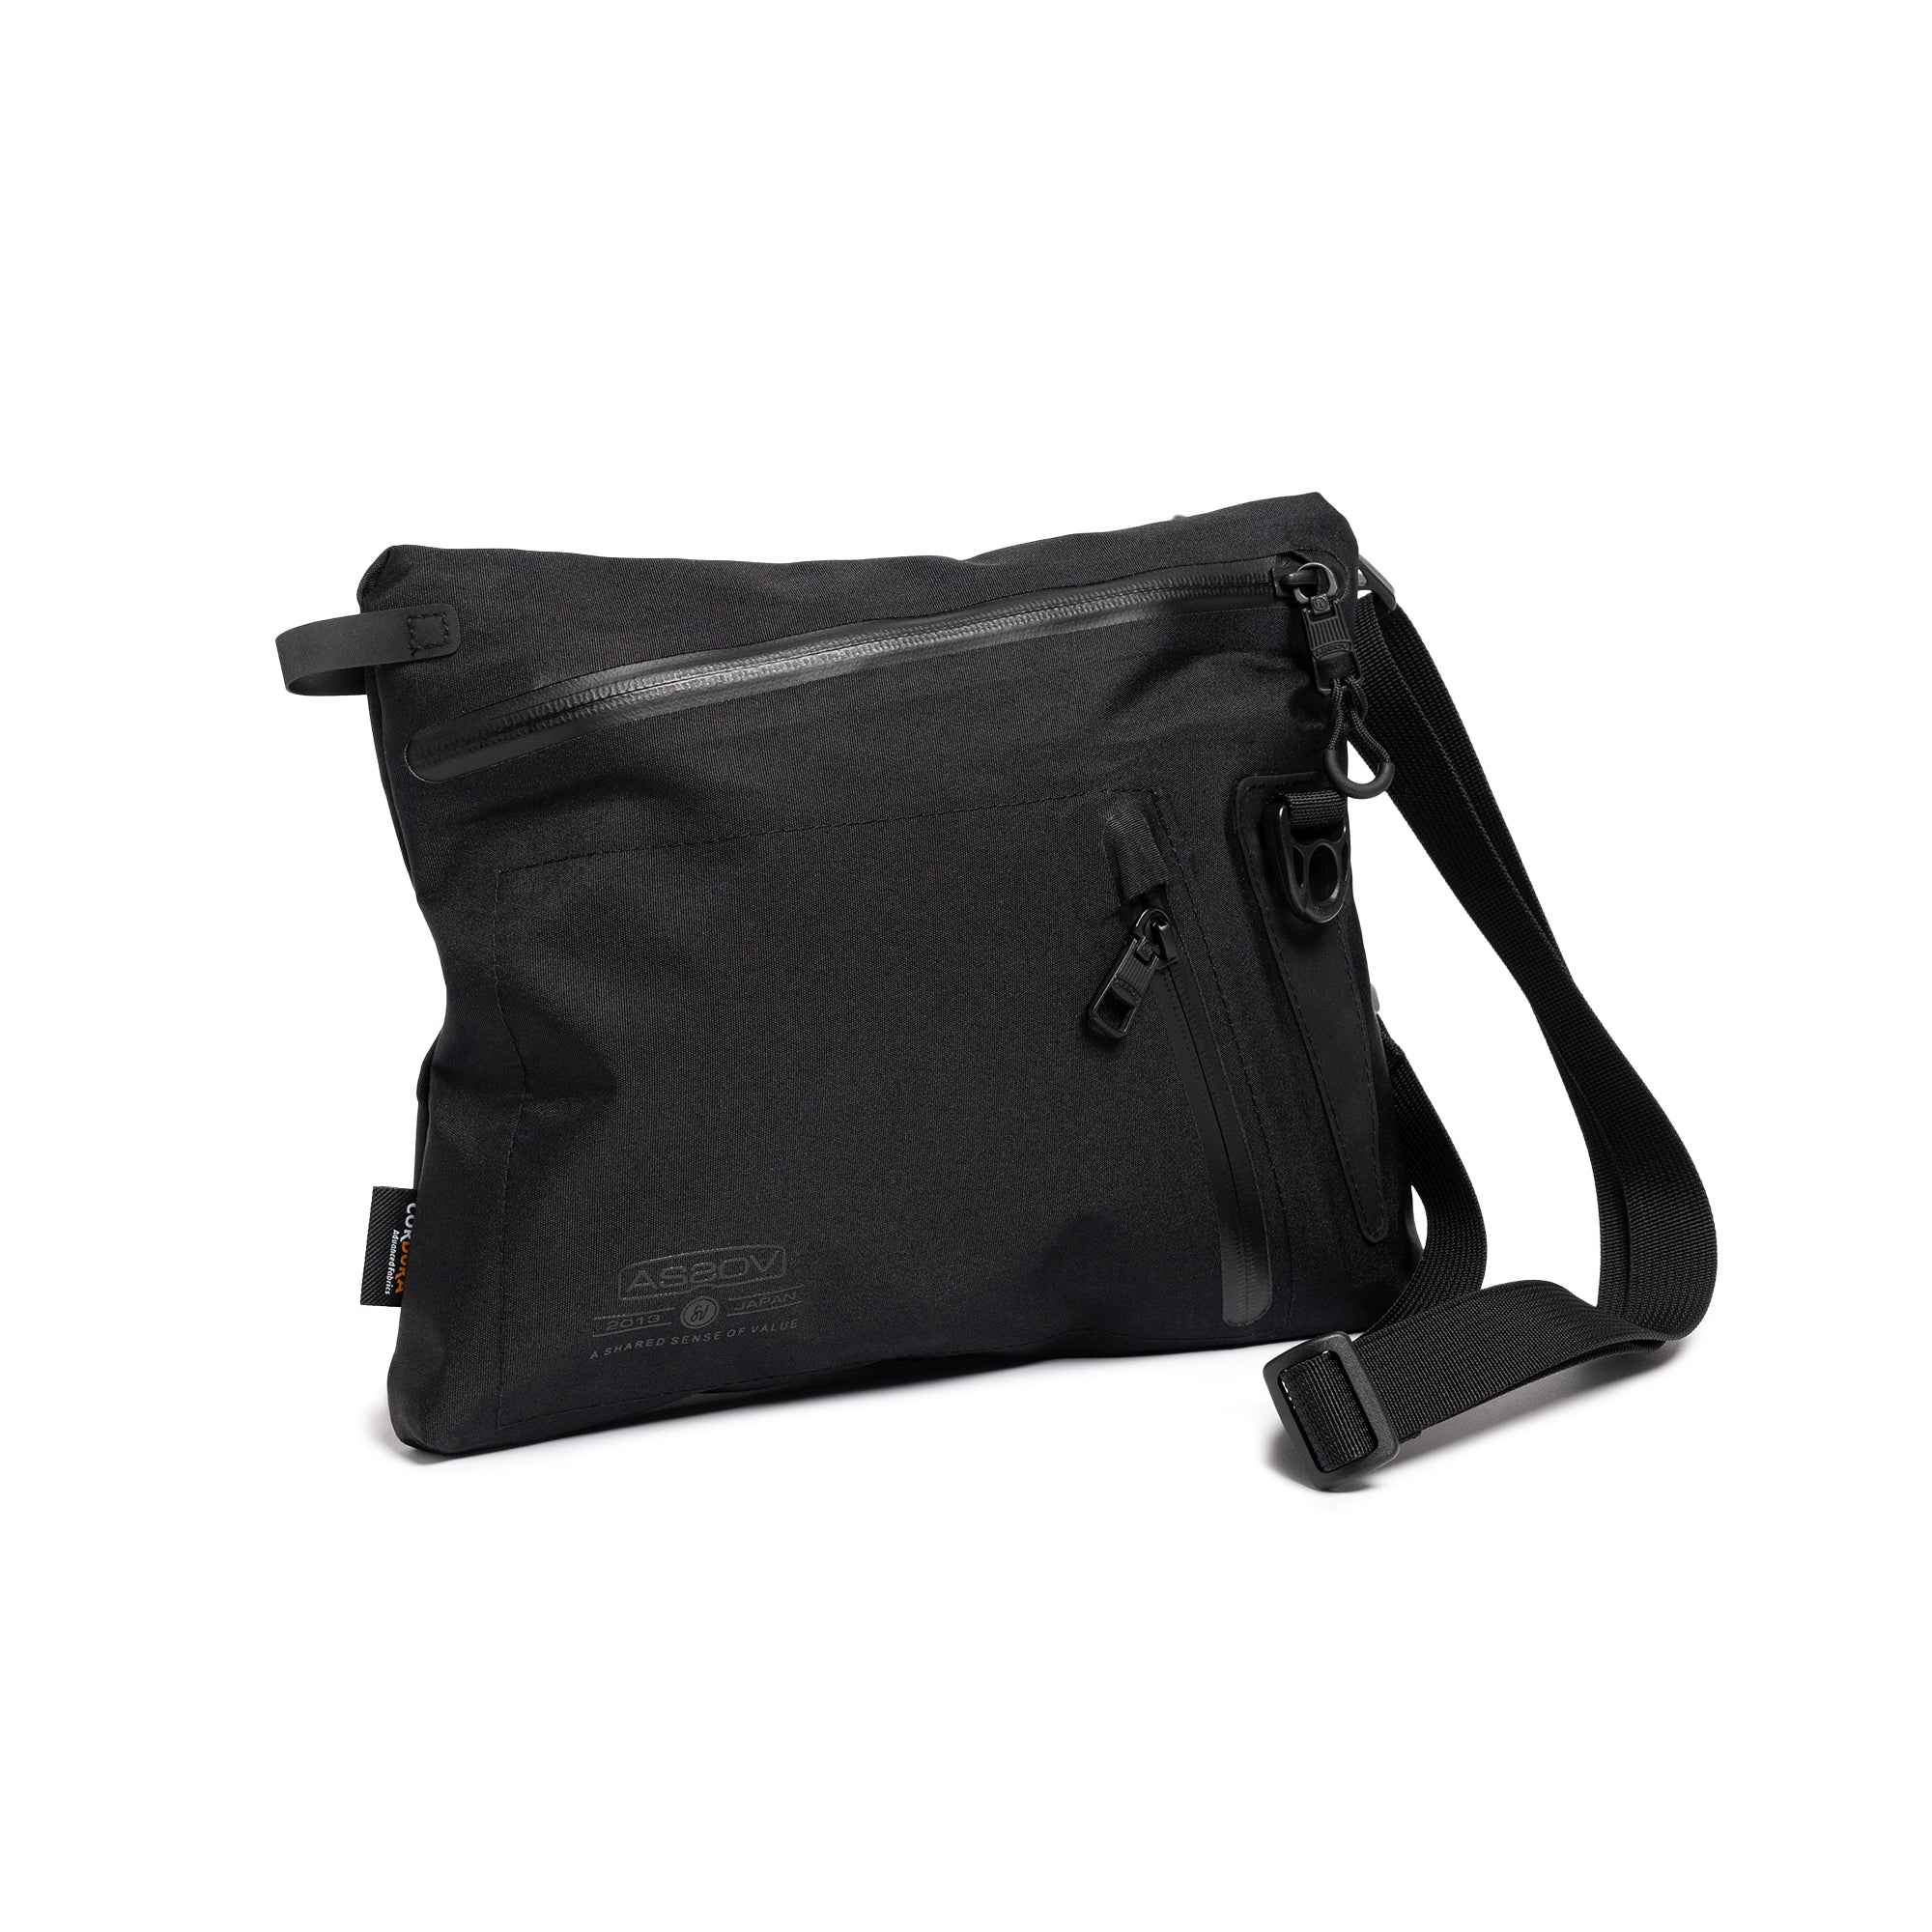 Keith 15.6 Laptop Backpack